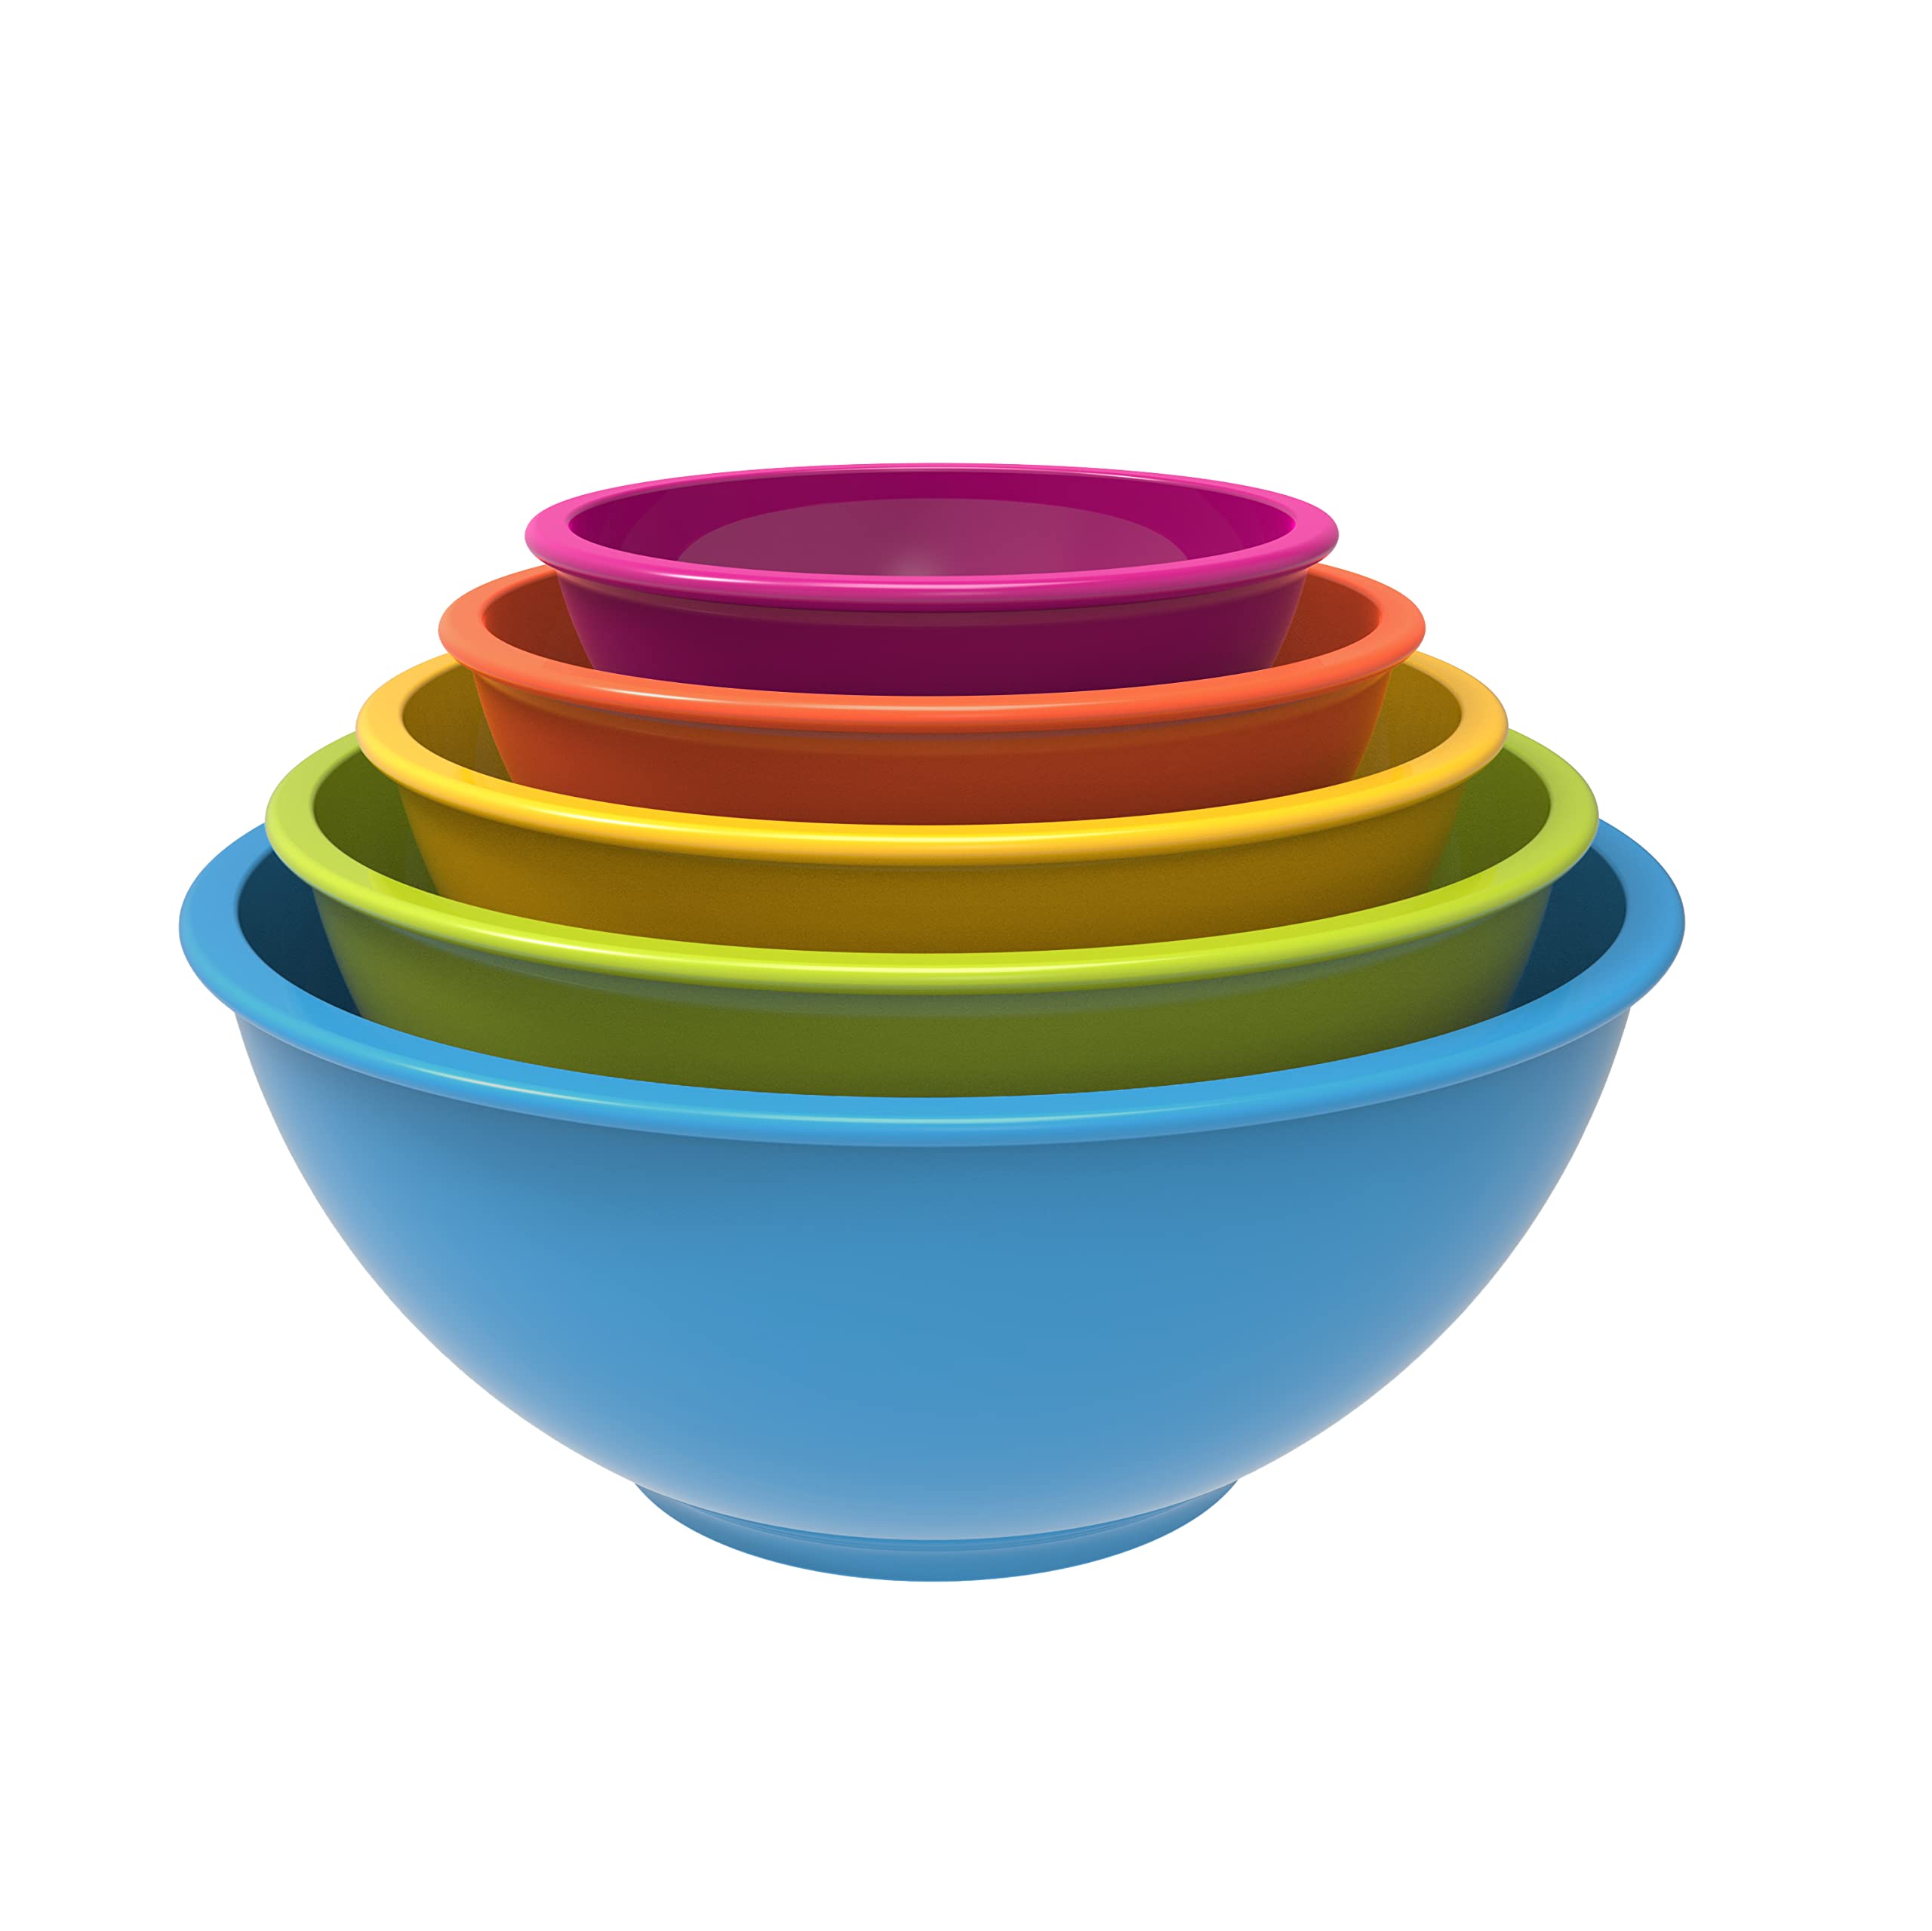 Zak Designs Colorways Mixing Bowl Set, Nesting Bowls for Space Saving Storage, Made with Durable Melamine, Great for Prepping and Serving Food (Azu...